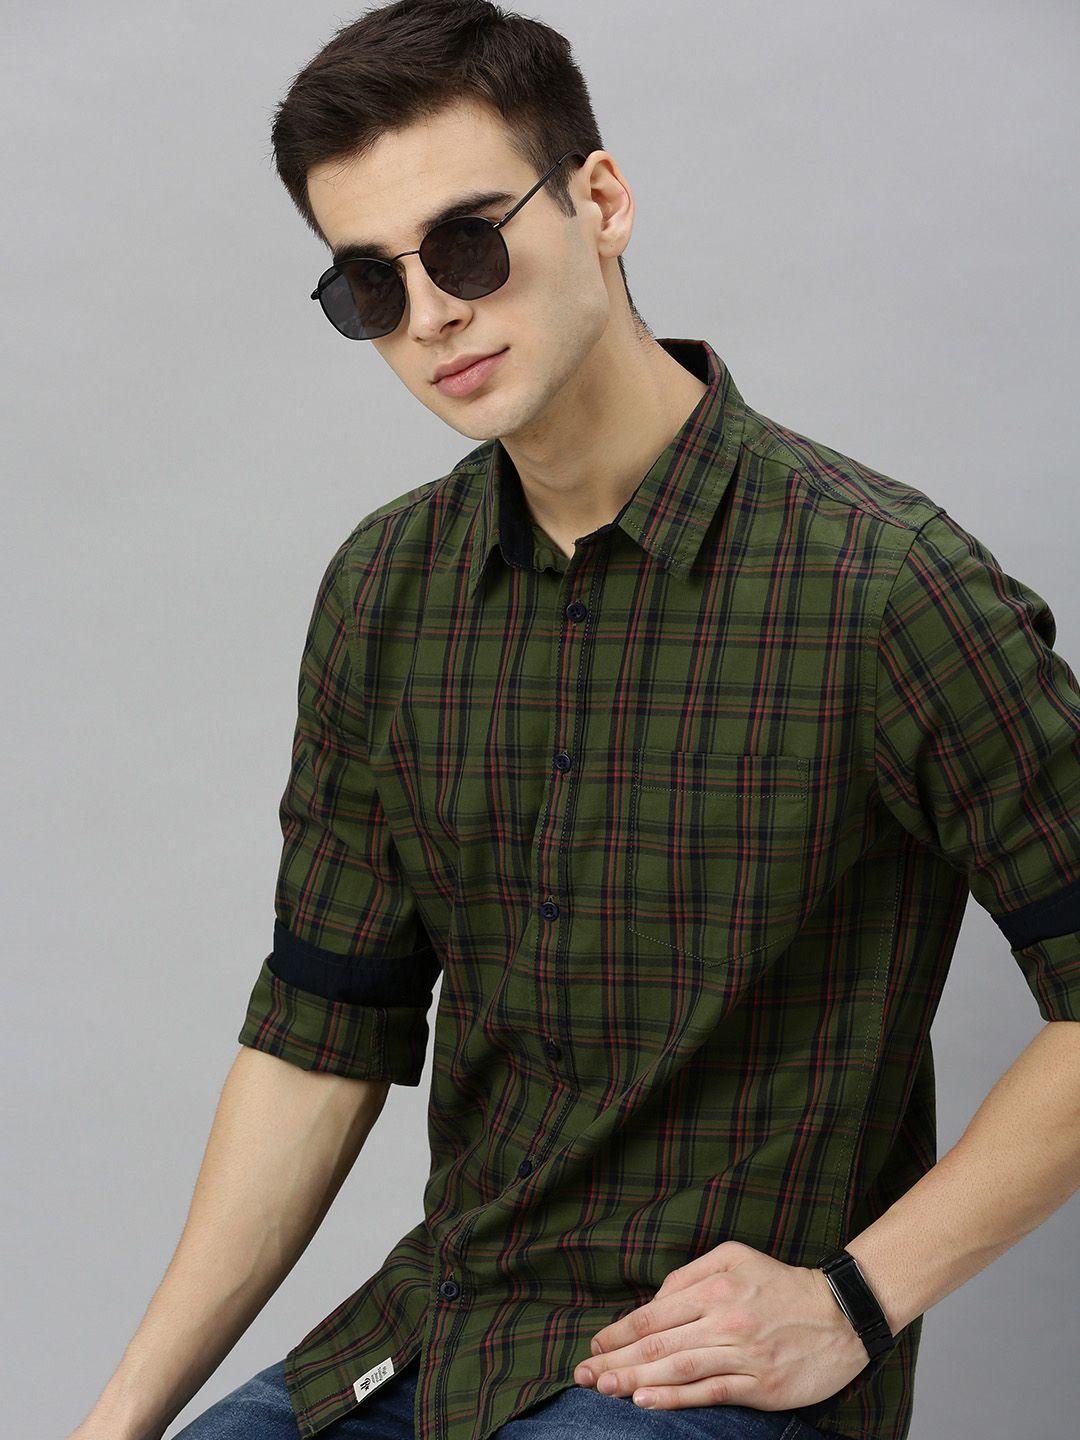 roadster-men-olive-green-&-navy-blue-regular-fit-checked-casual-sustainable-shirt